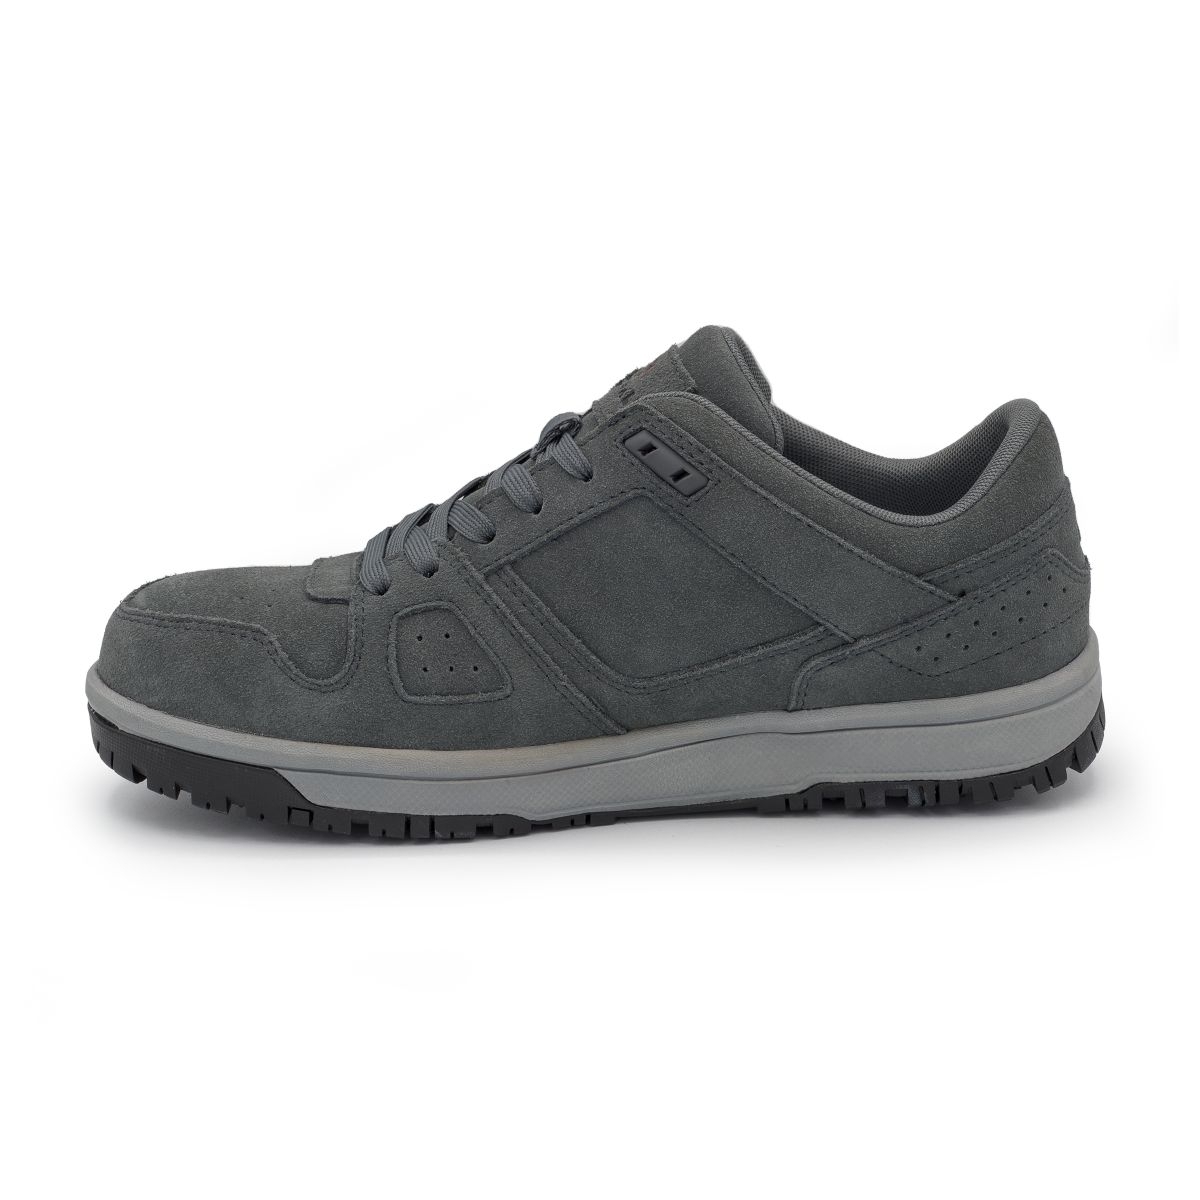 AIRWALK SAFETY Men's Mongo Composite Toe EH Work Shoe Charcoal/Grey - AW6301 CHARCOAL/GRAY - CHARCOAL/GRAY, 13-W